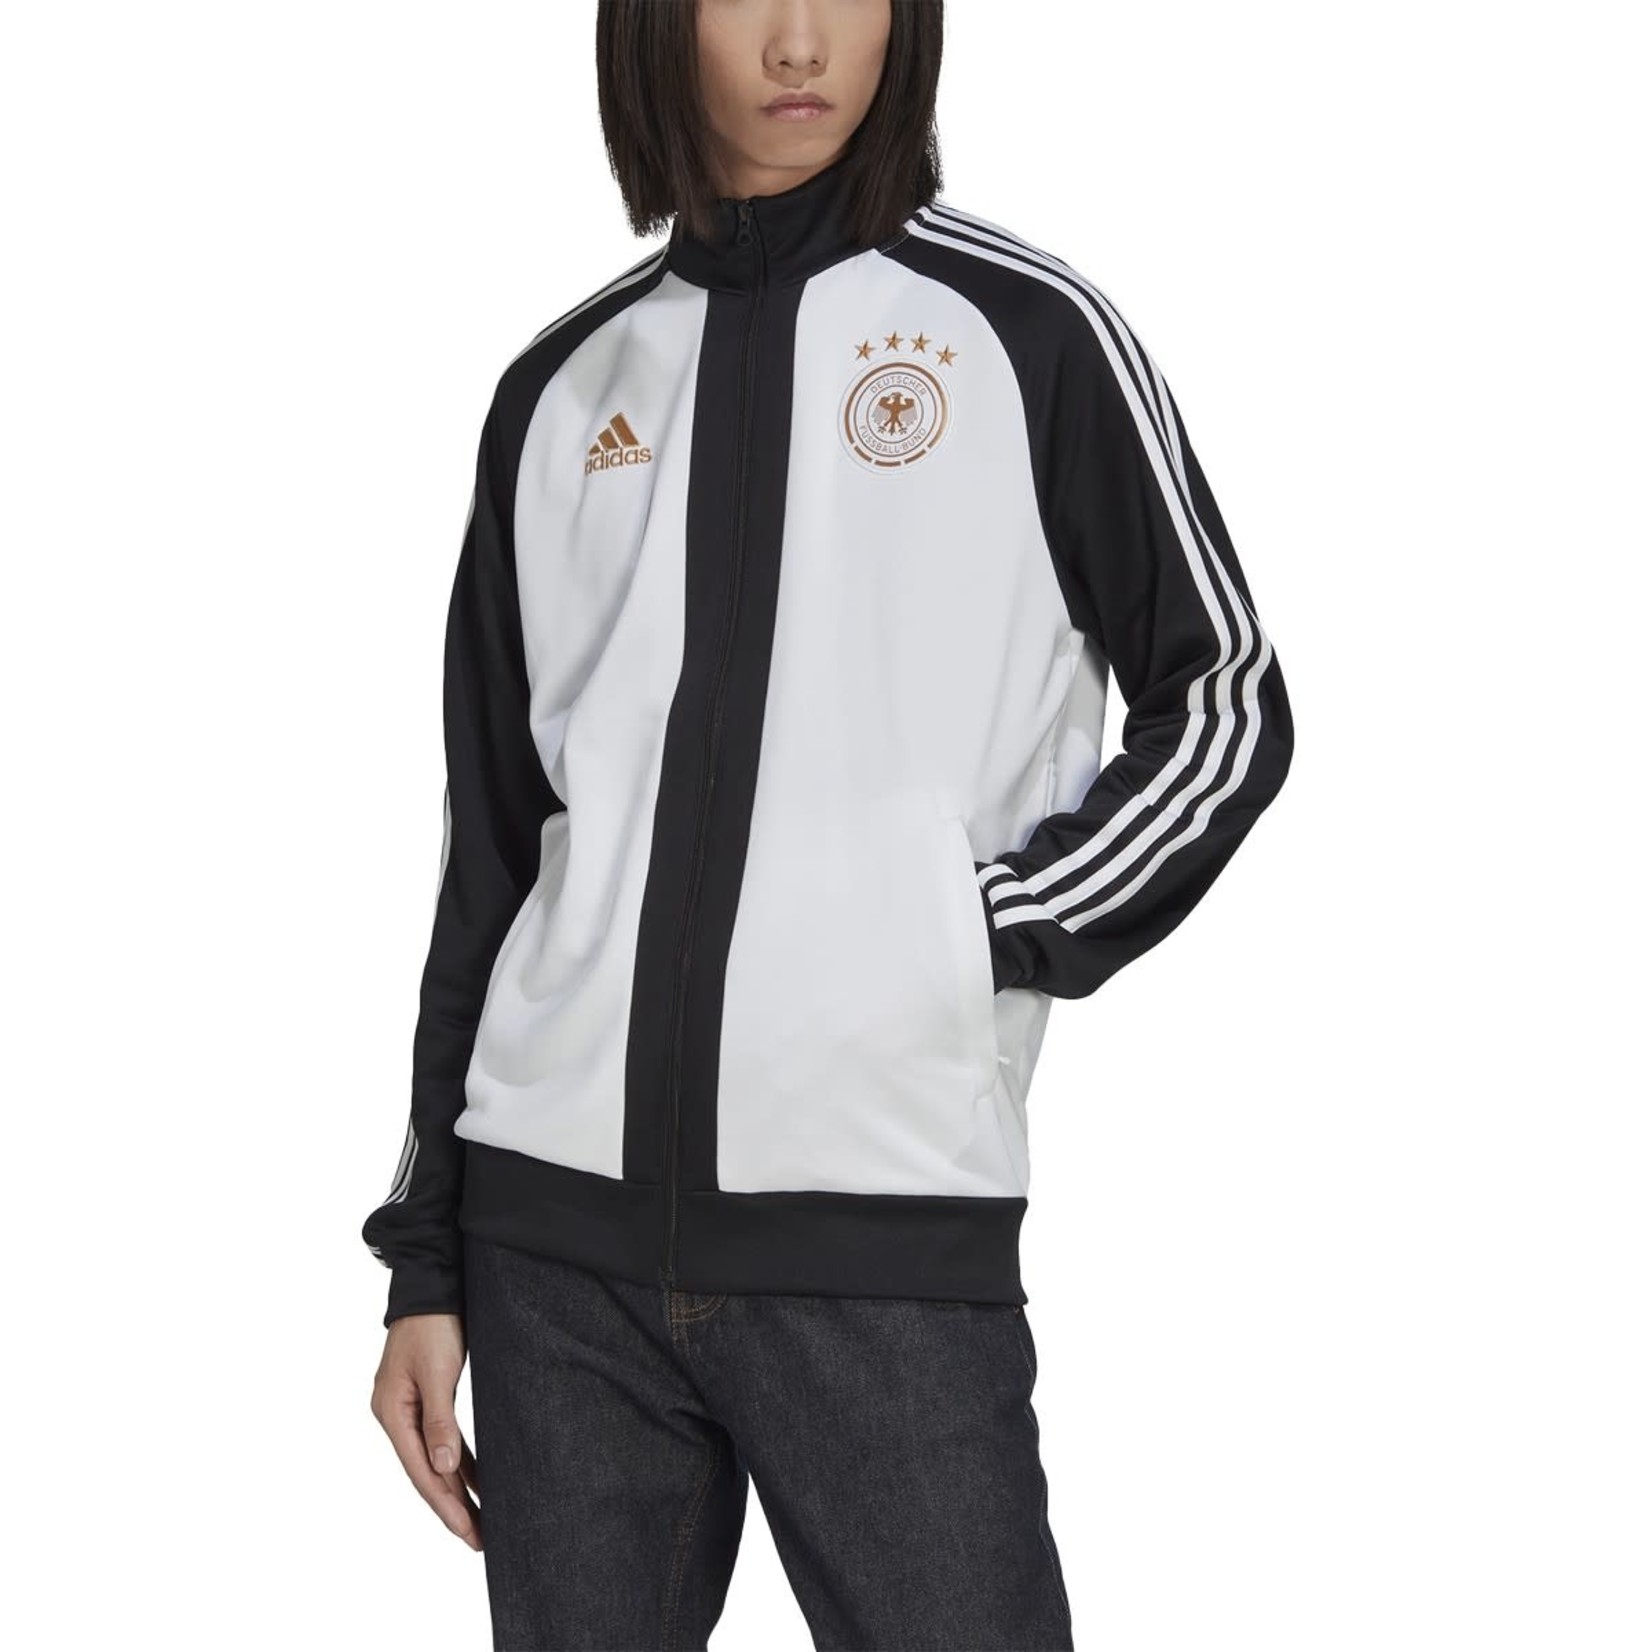 ADIDAS GERMANY 2022 DNA TRACK TOP (BLACK/WHITE)